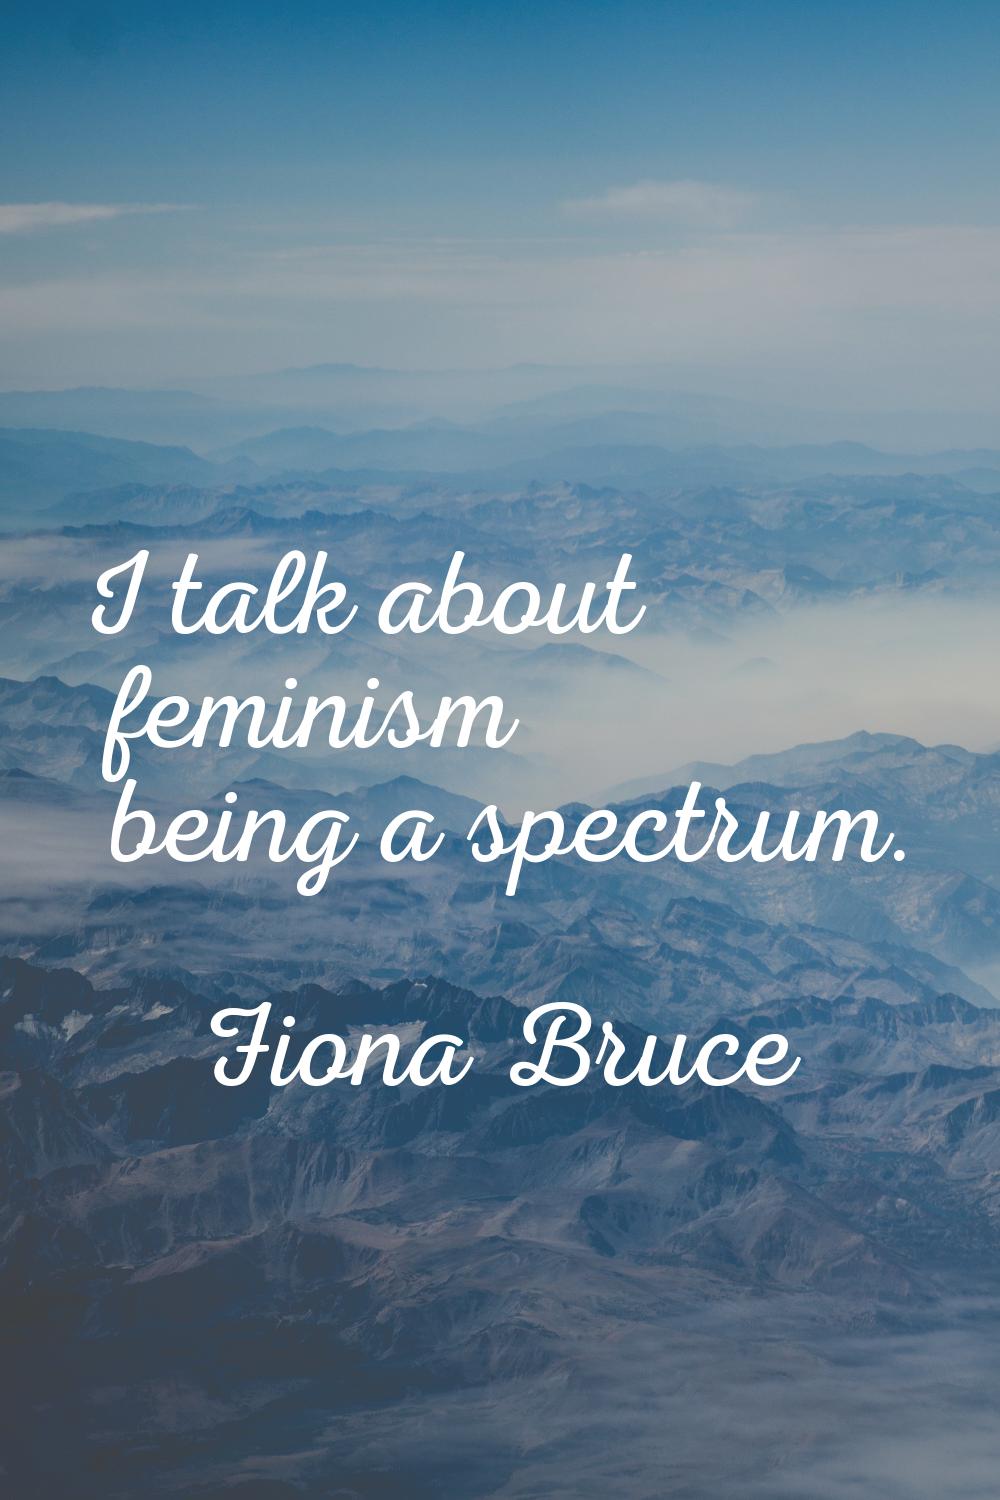 I talk about feminism being a spectrum.